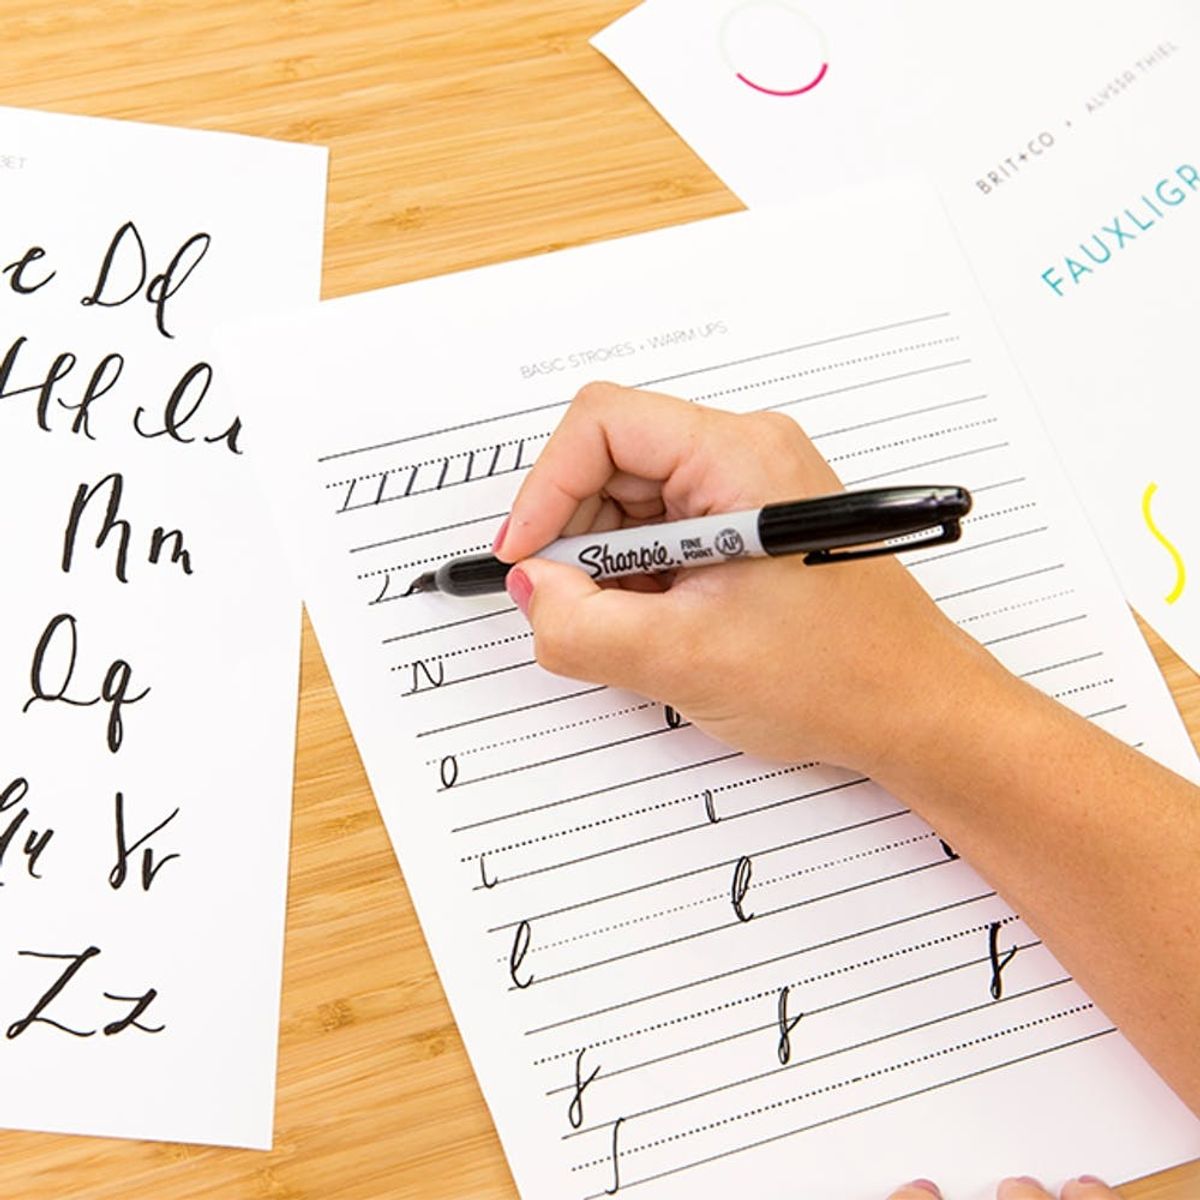 Learn Calligraphy Quick (Start With Fauxligraphy First!)